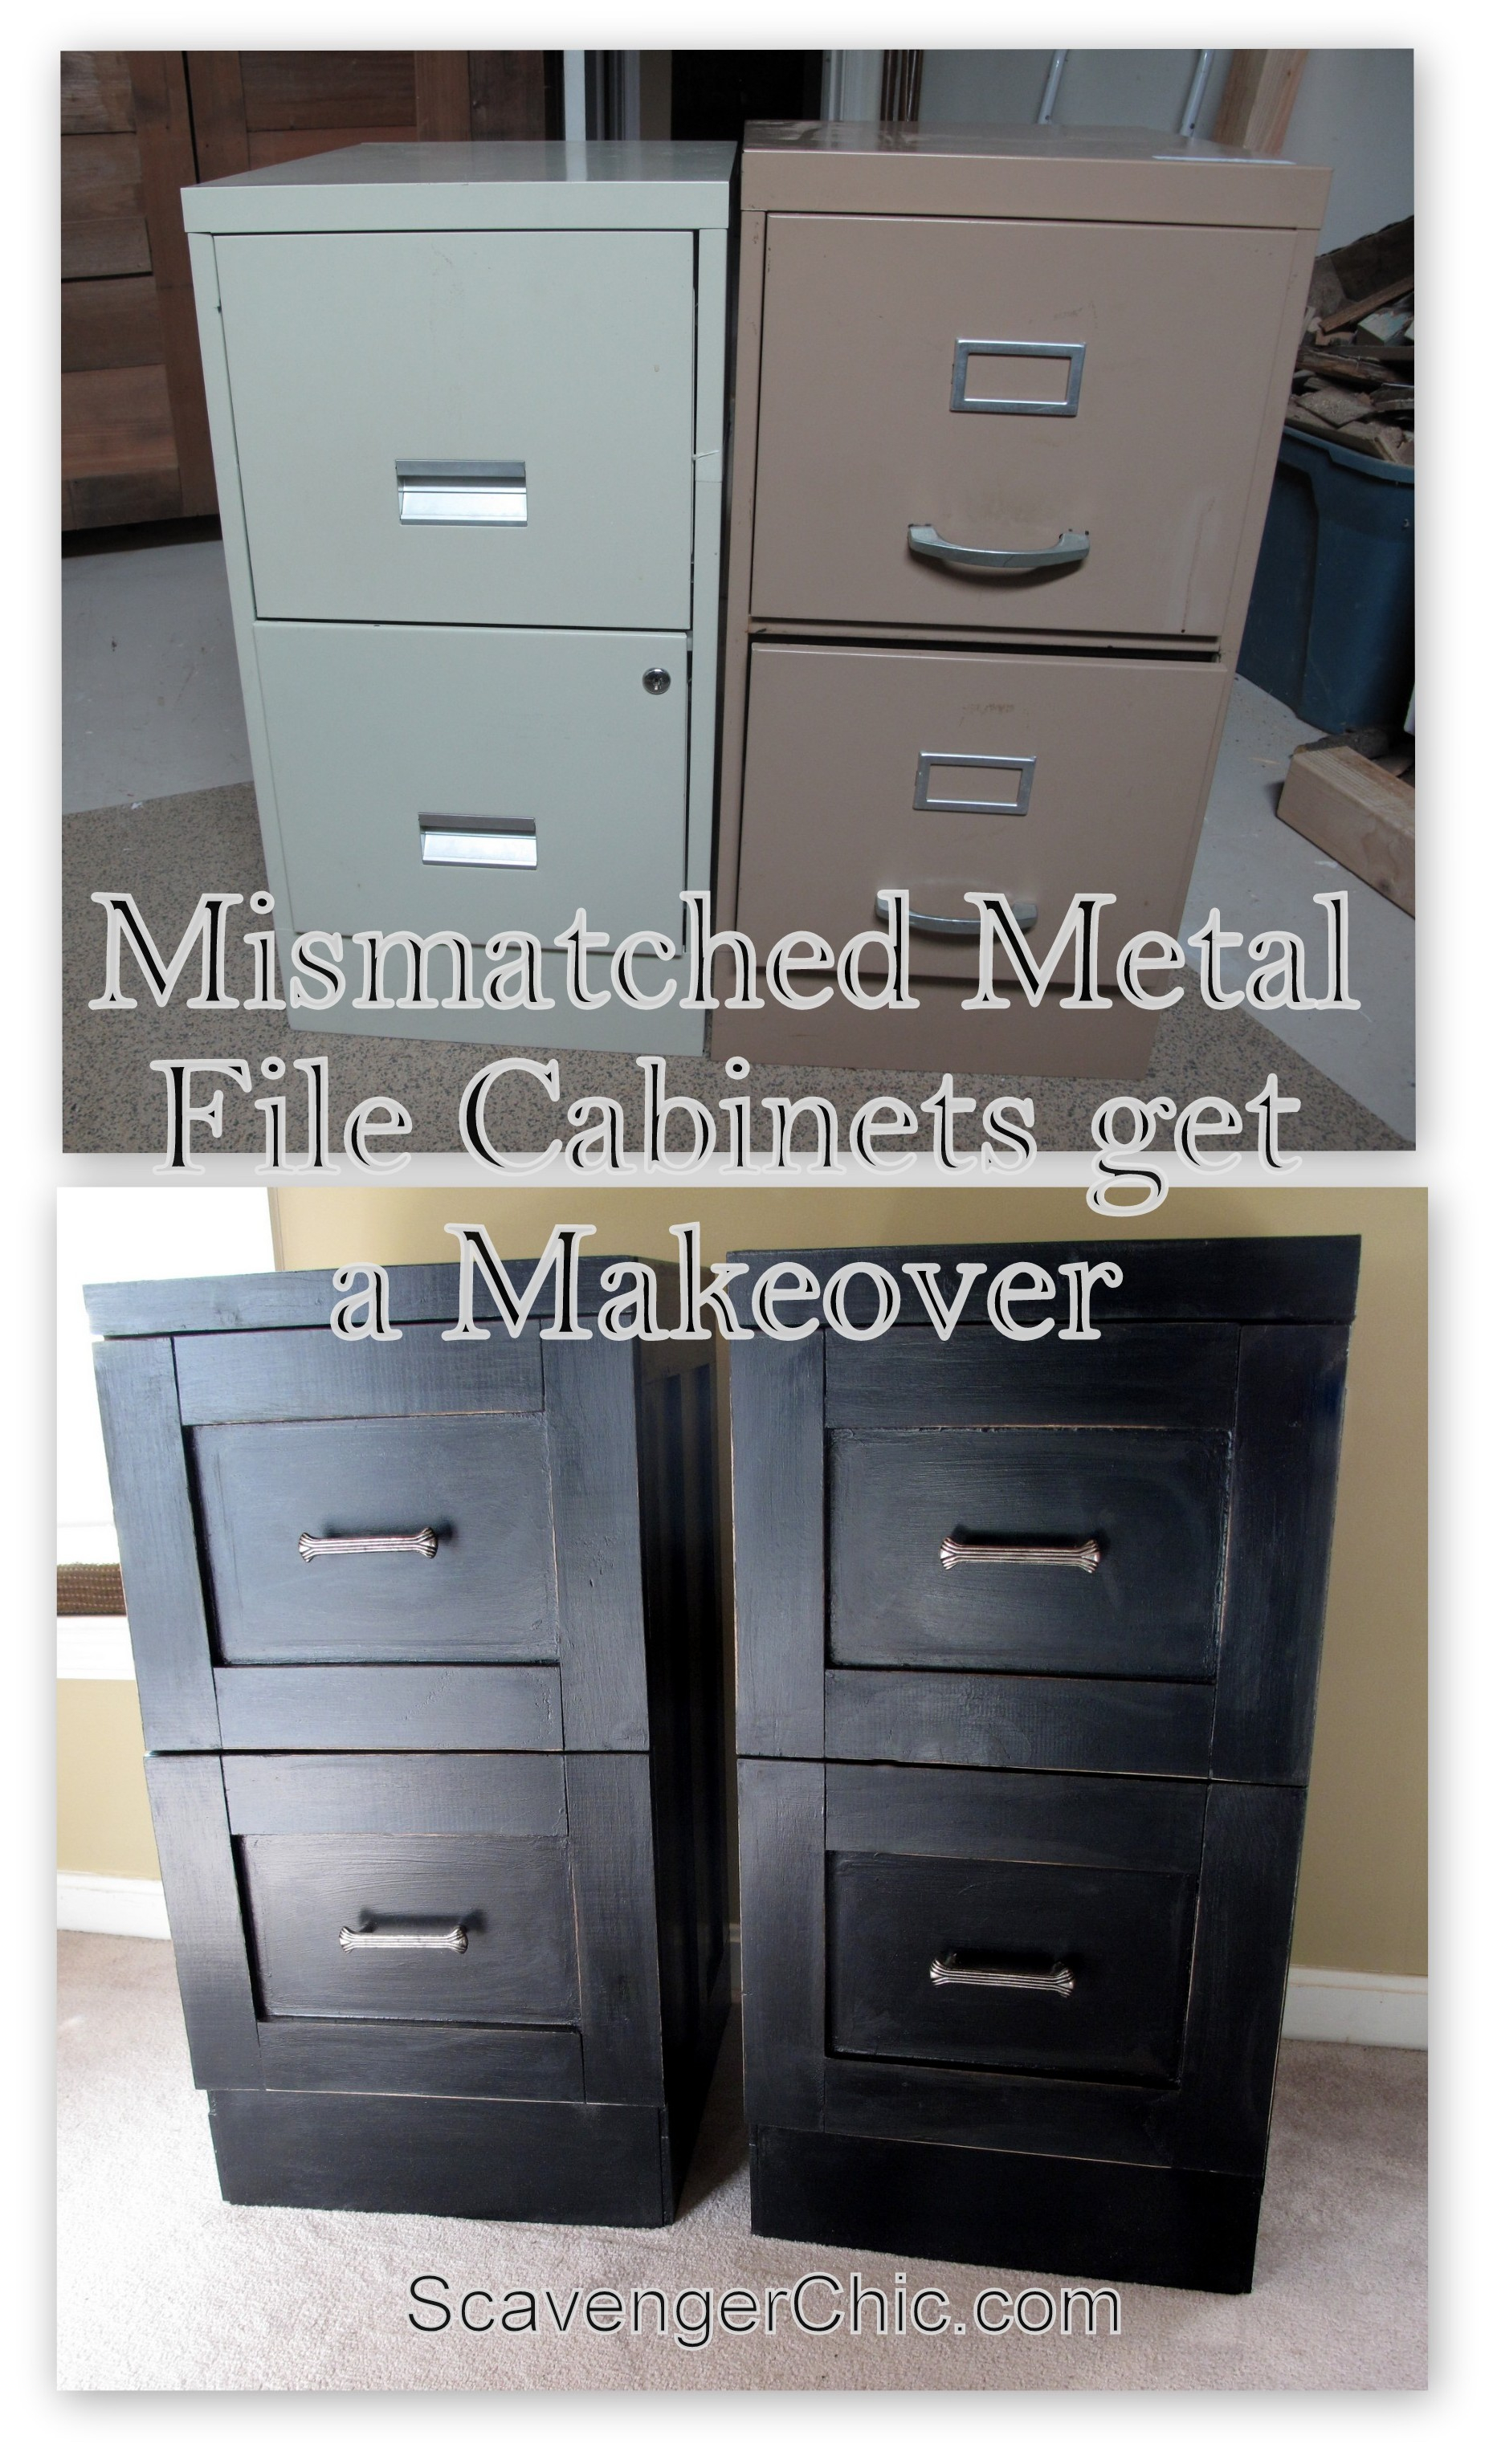 Mismatched Metal File Cabinets Get A Makeover Scavenger Chic regarding proportions 1859 X 3069